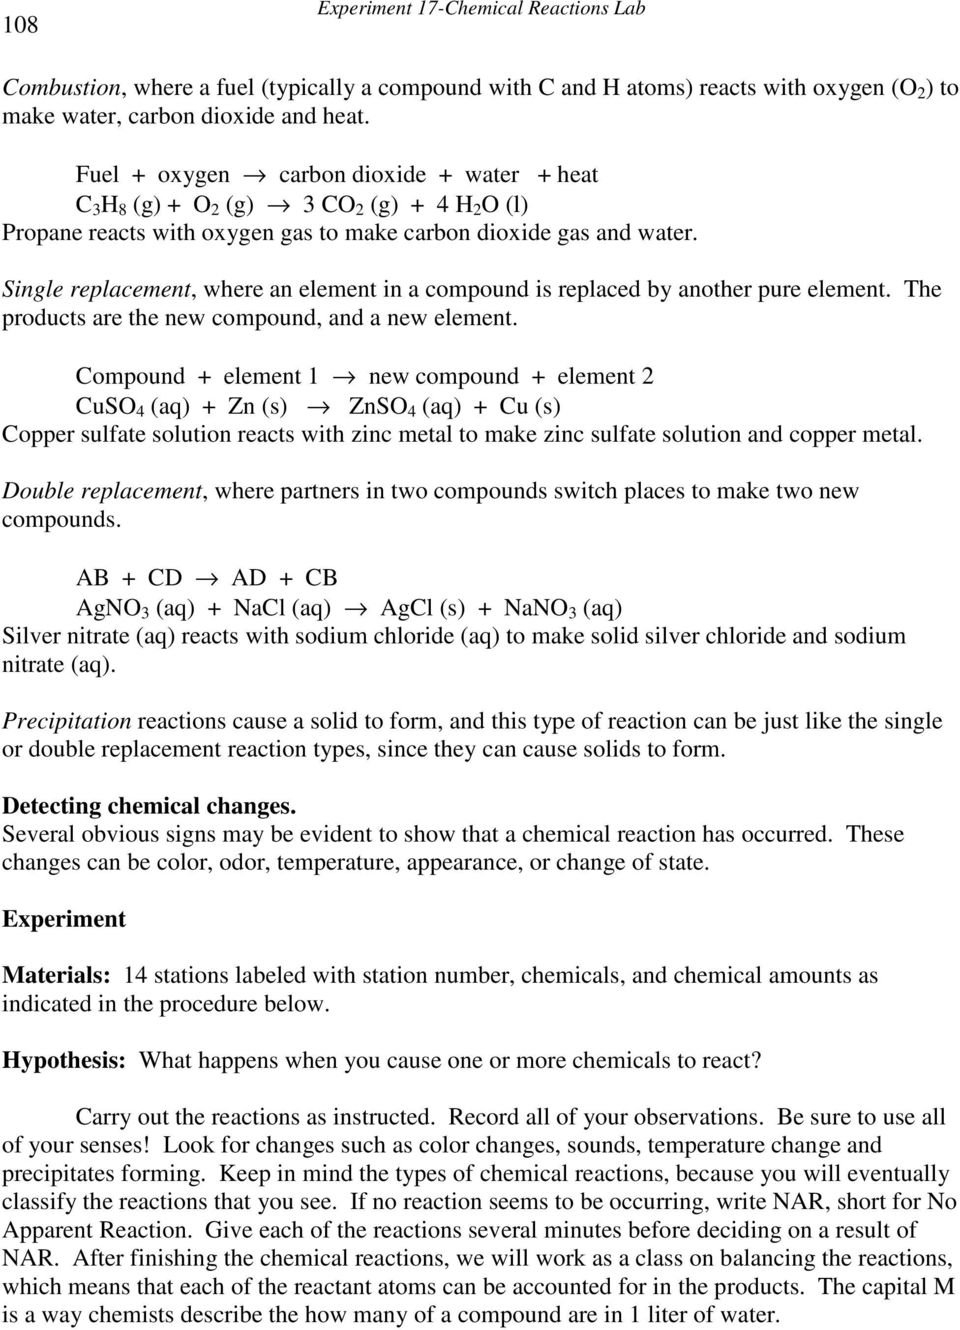 Experiment 17Chemical Reactions Lab  Pdf For Types Of Chemical Reactions Worksheet Pogil